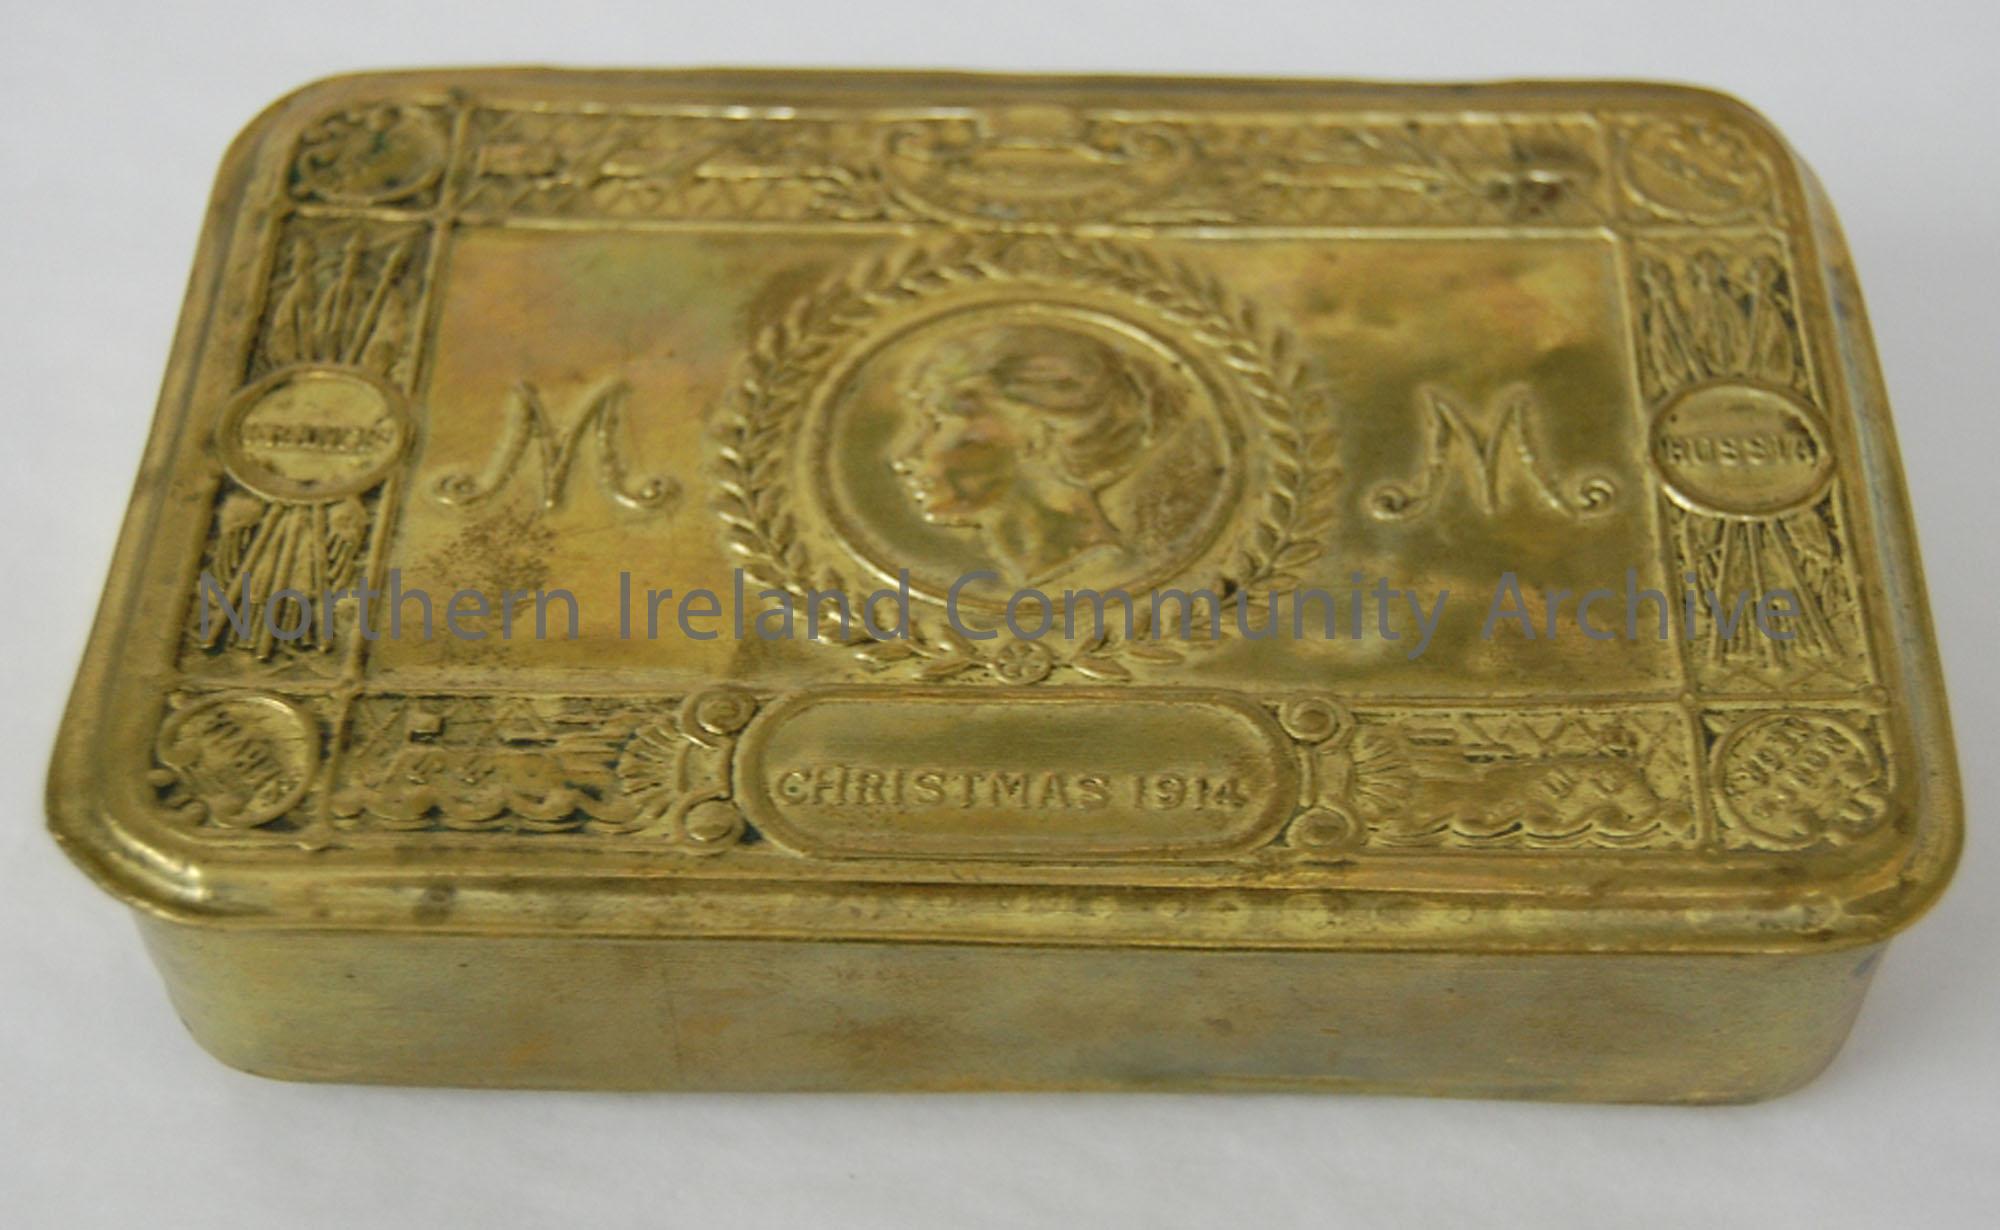 Princess Mary Christmas brass embossed box 1914.The surface of the lid depicts the head of Princess Mary in the centre, surrounded by a laurel wreath …